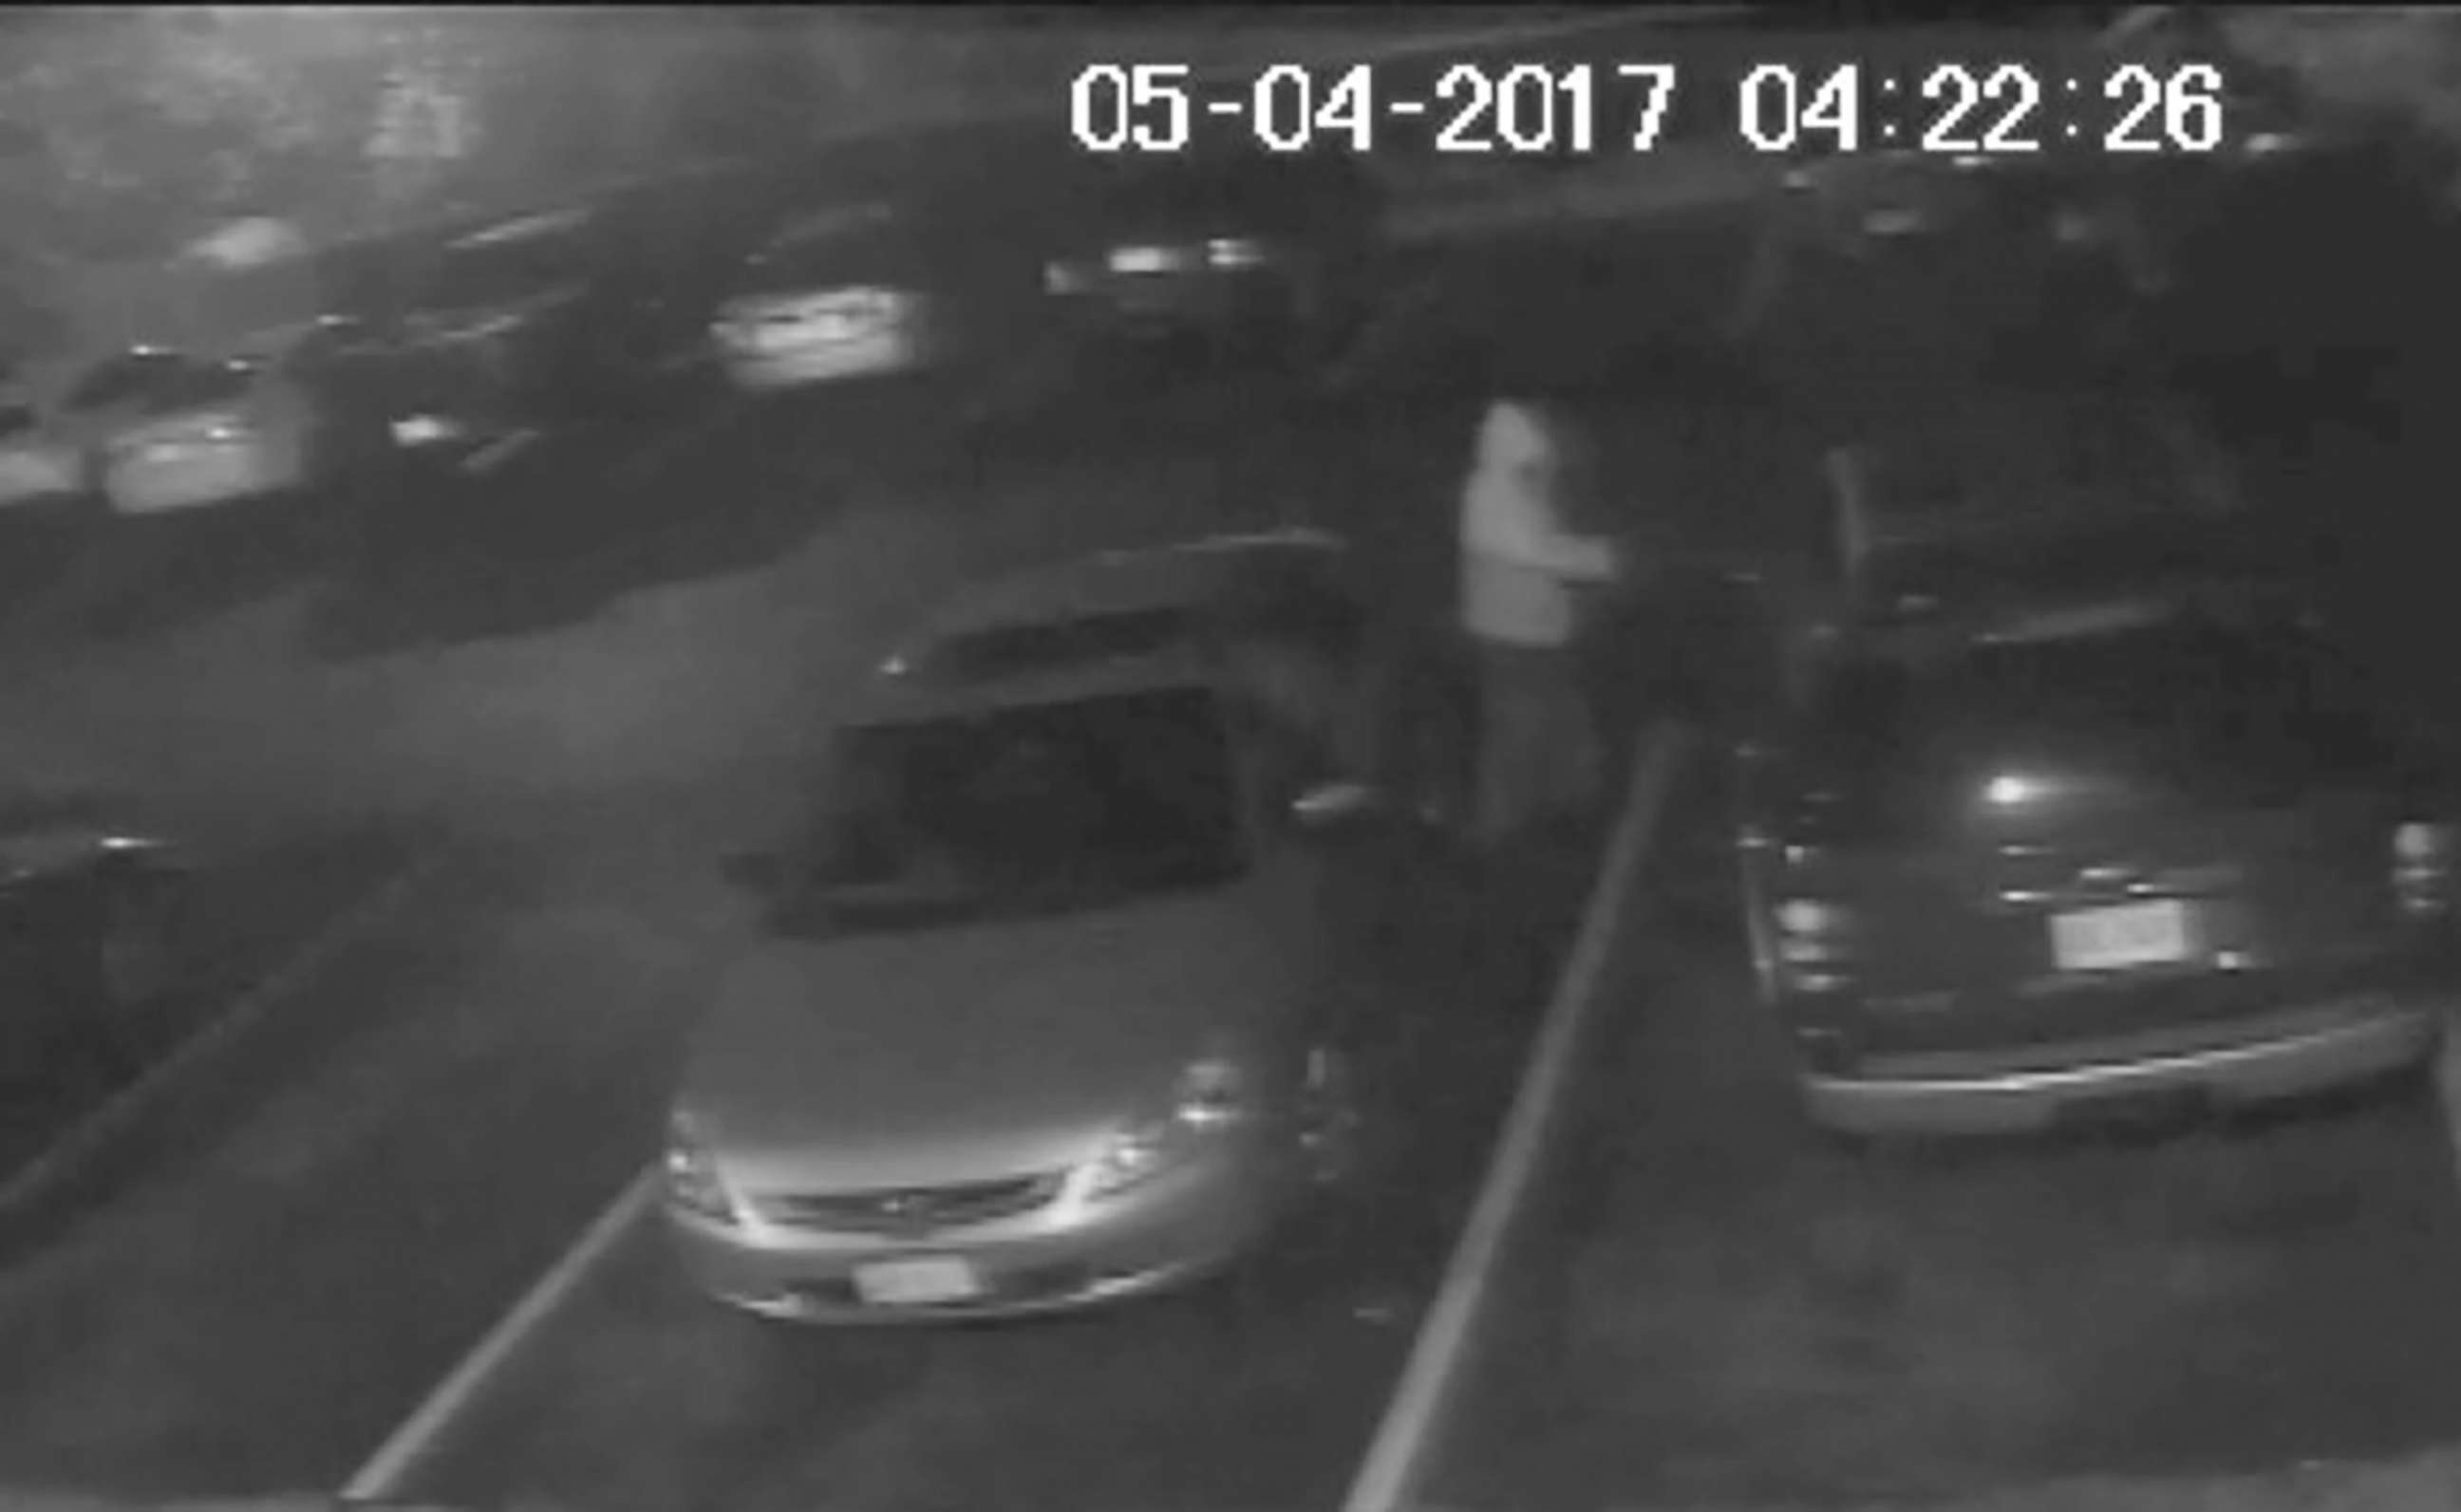 PHOTO: A single subject is captured on surveillance video during the vandalism incident on May 4, 2017.